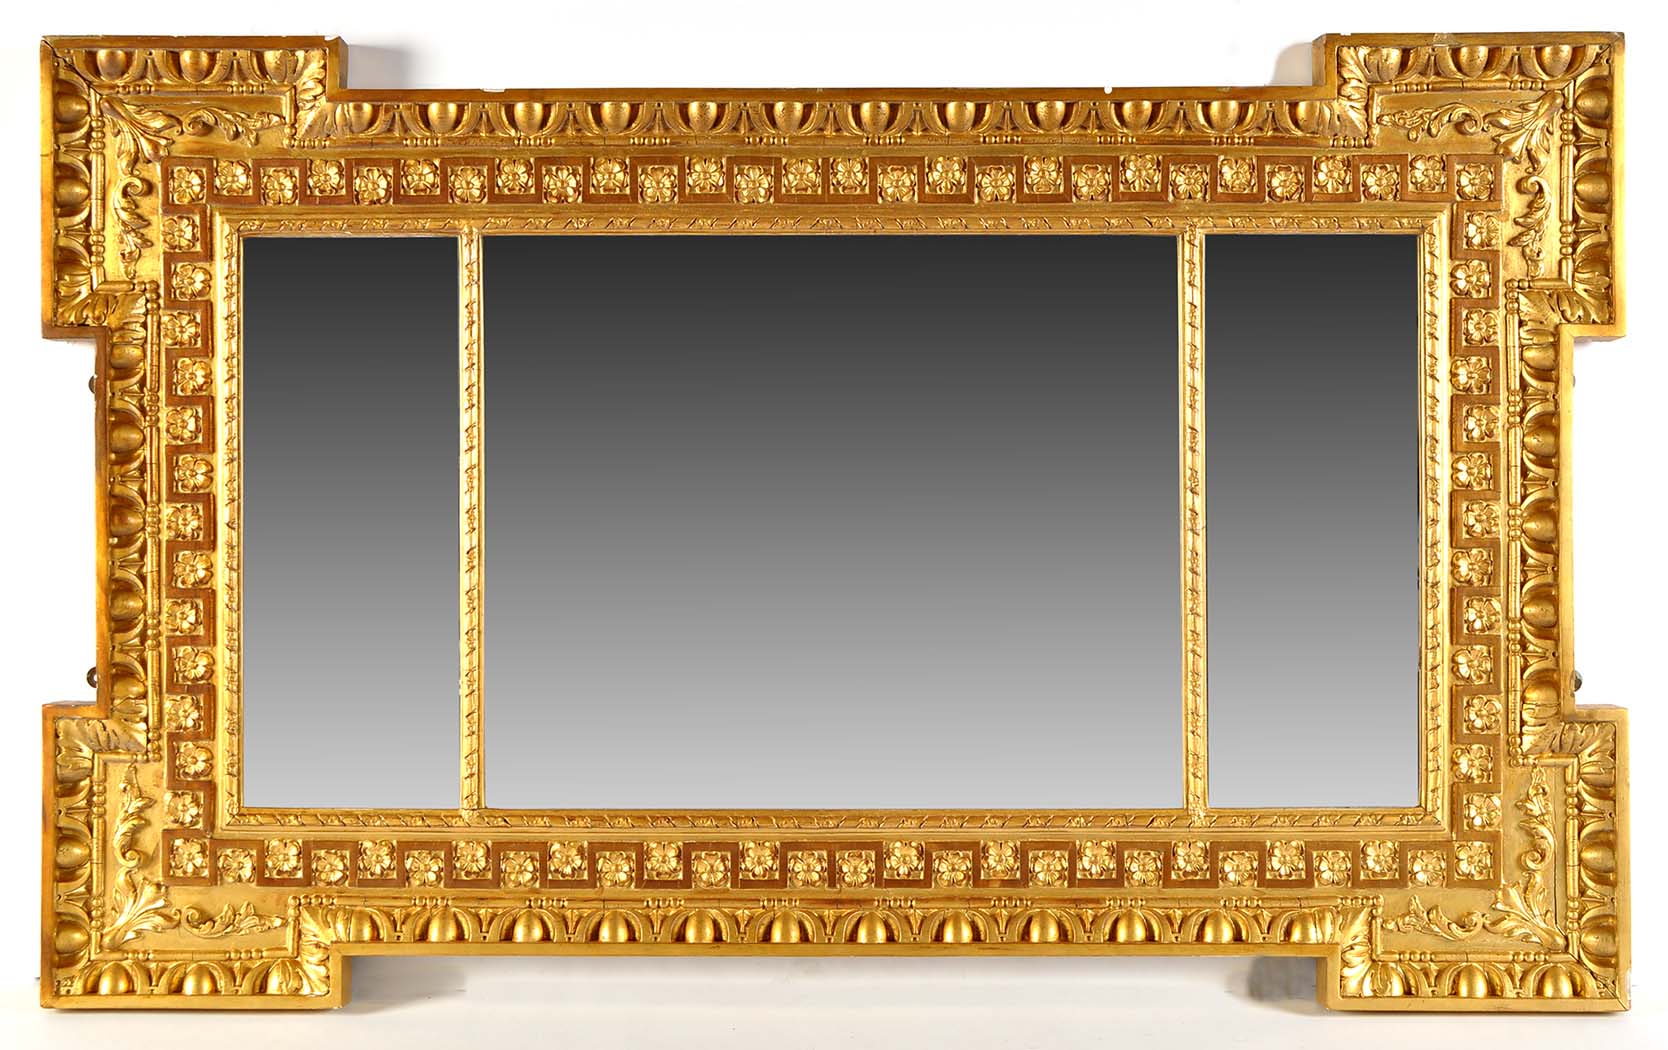 A George II style gilt overmantel mirror, in the manner of William Kent, with triple plates enclosed